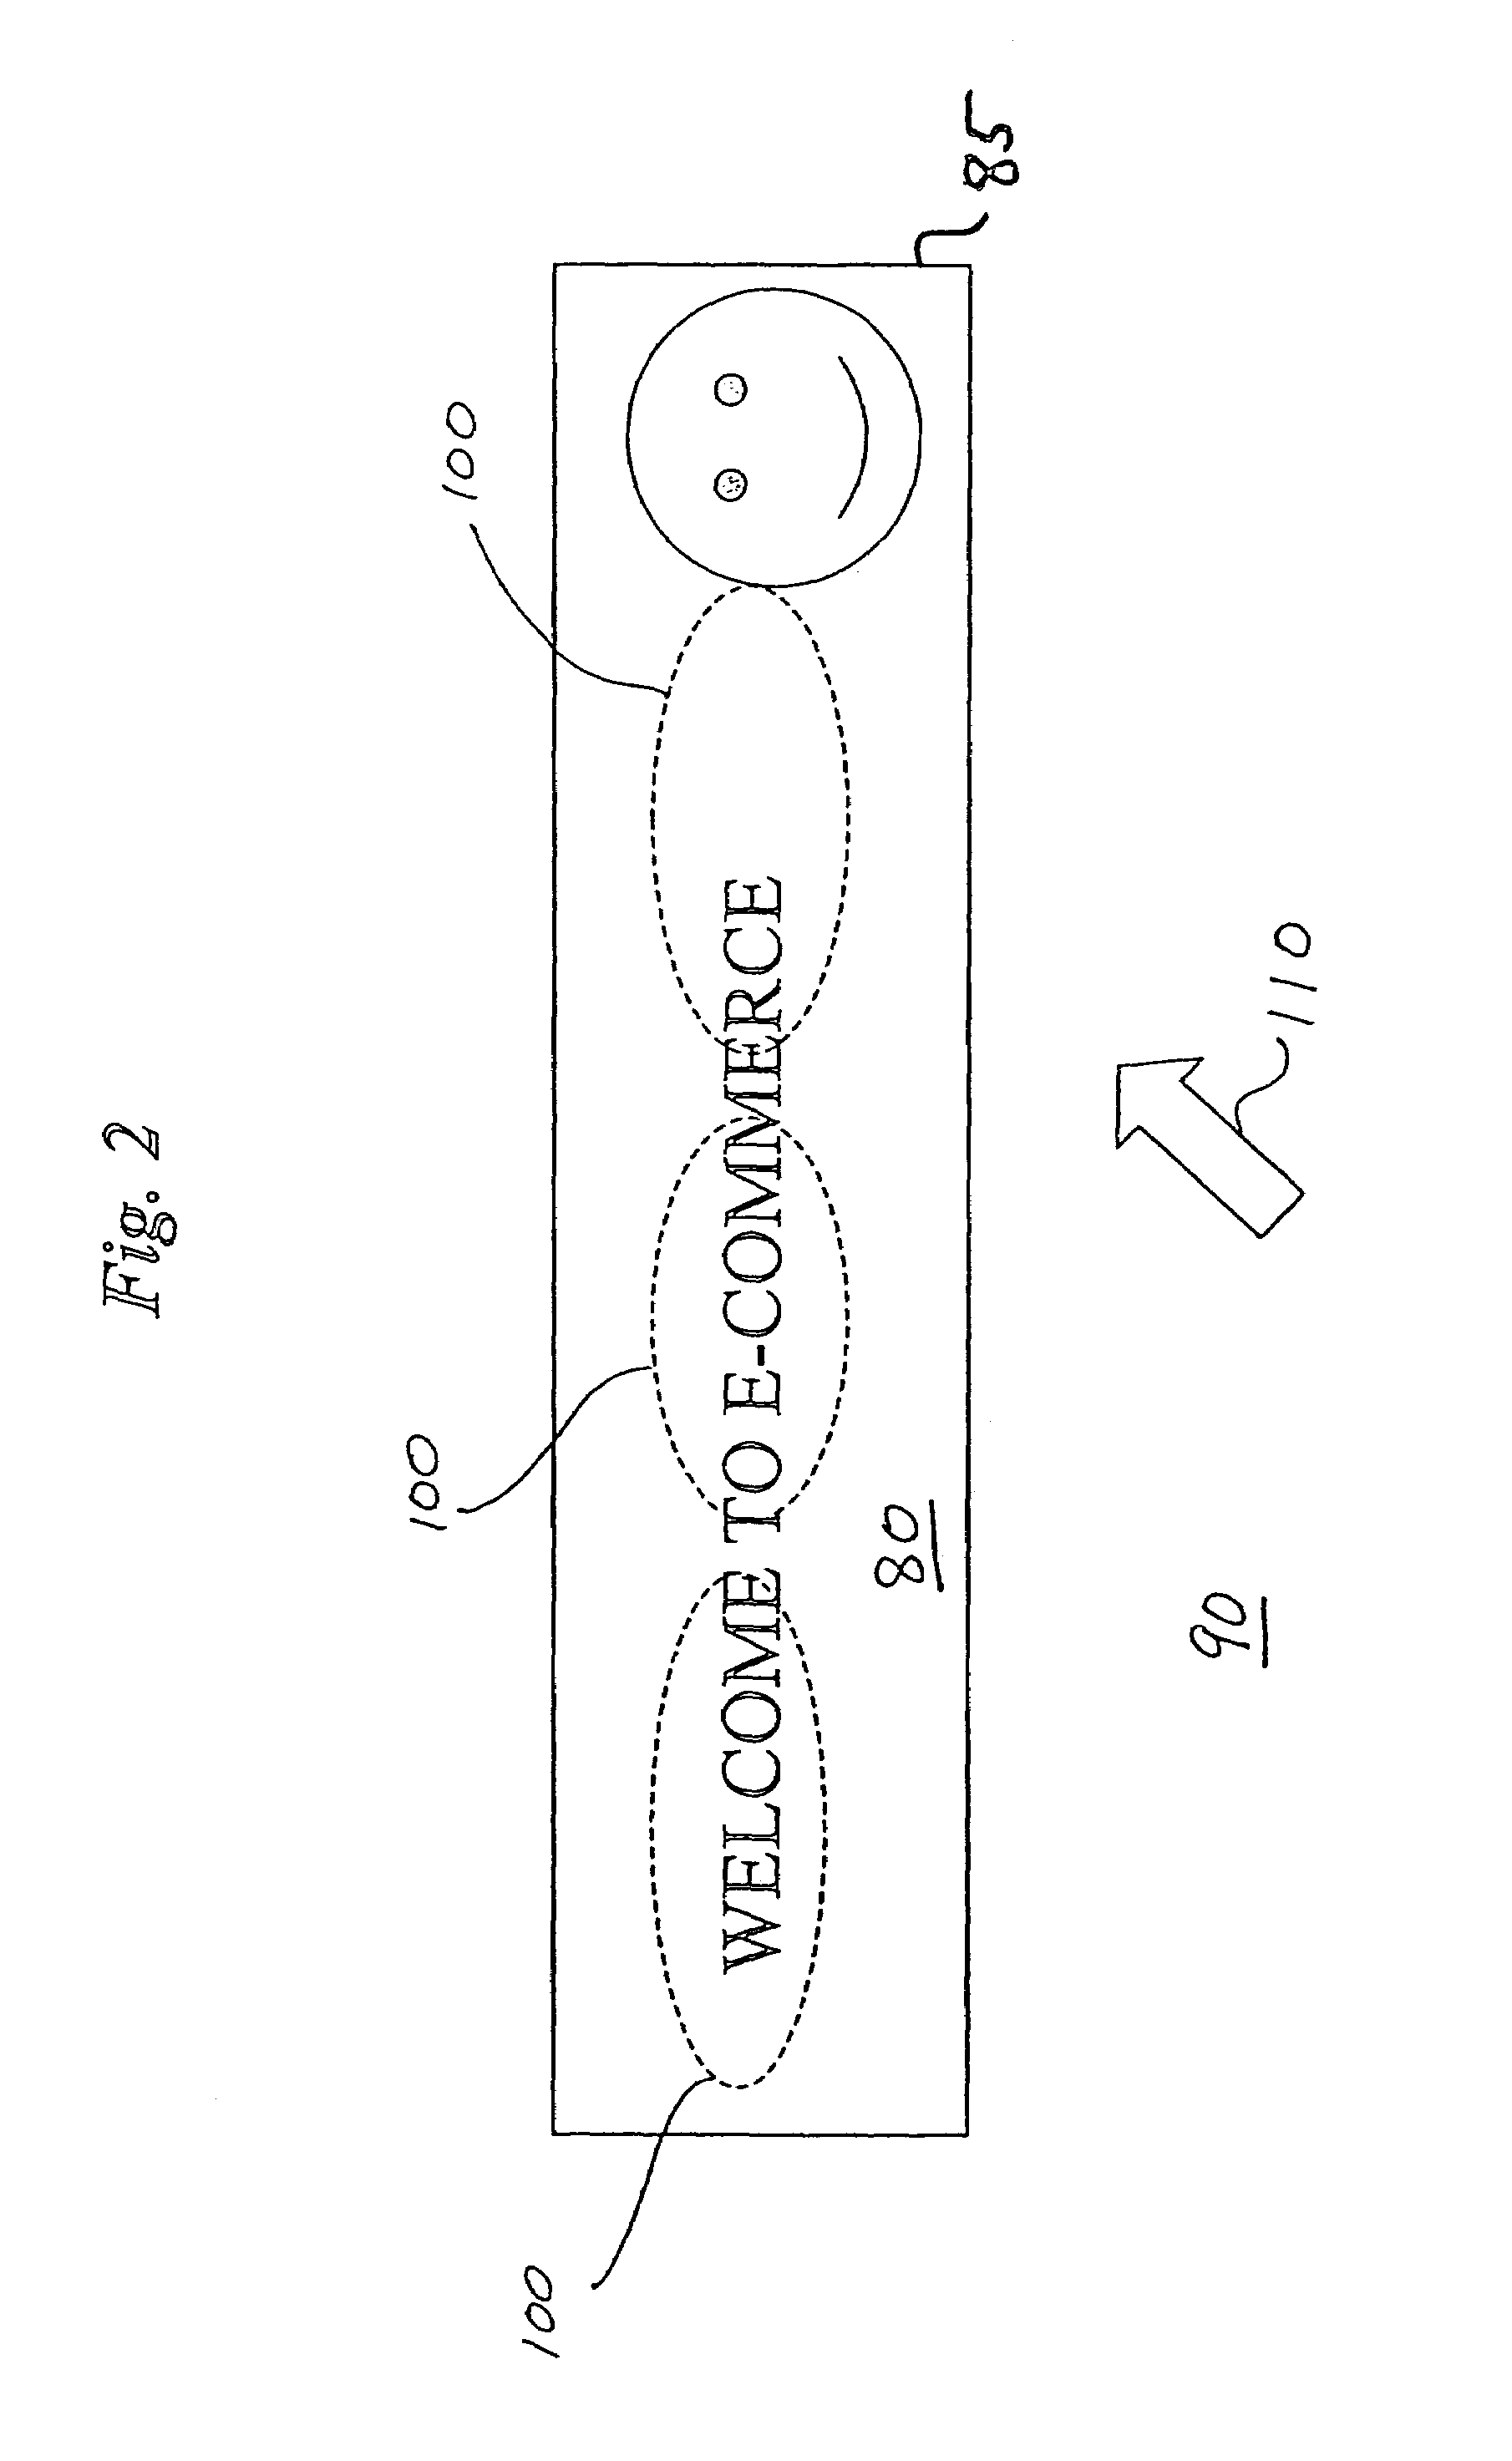 Method and system for creating and displaying images including pop-up images on a visual display